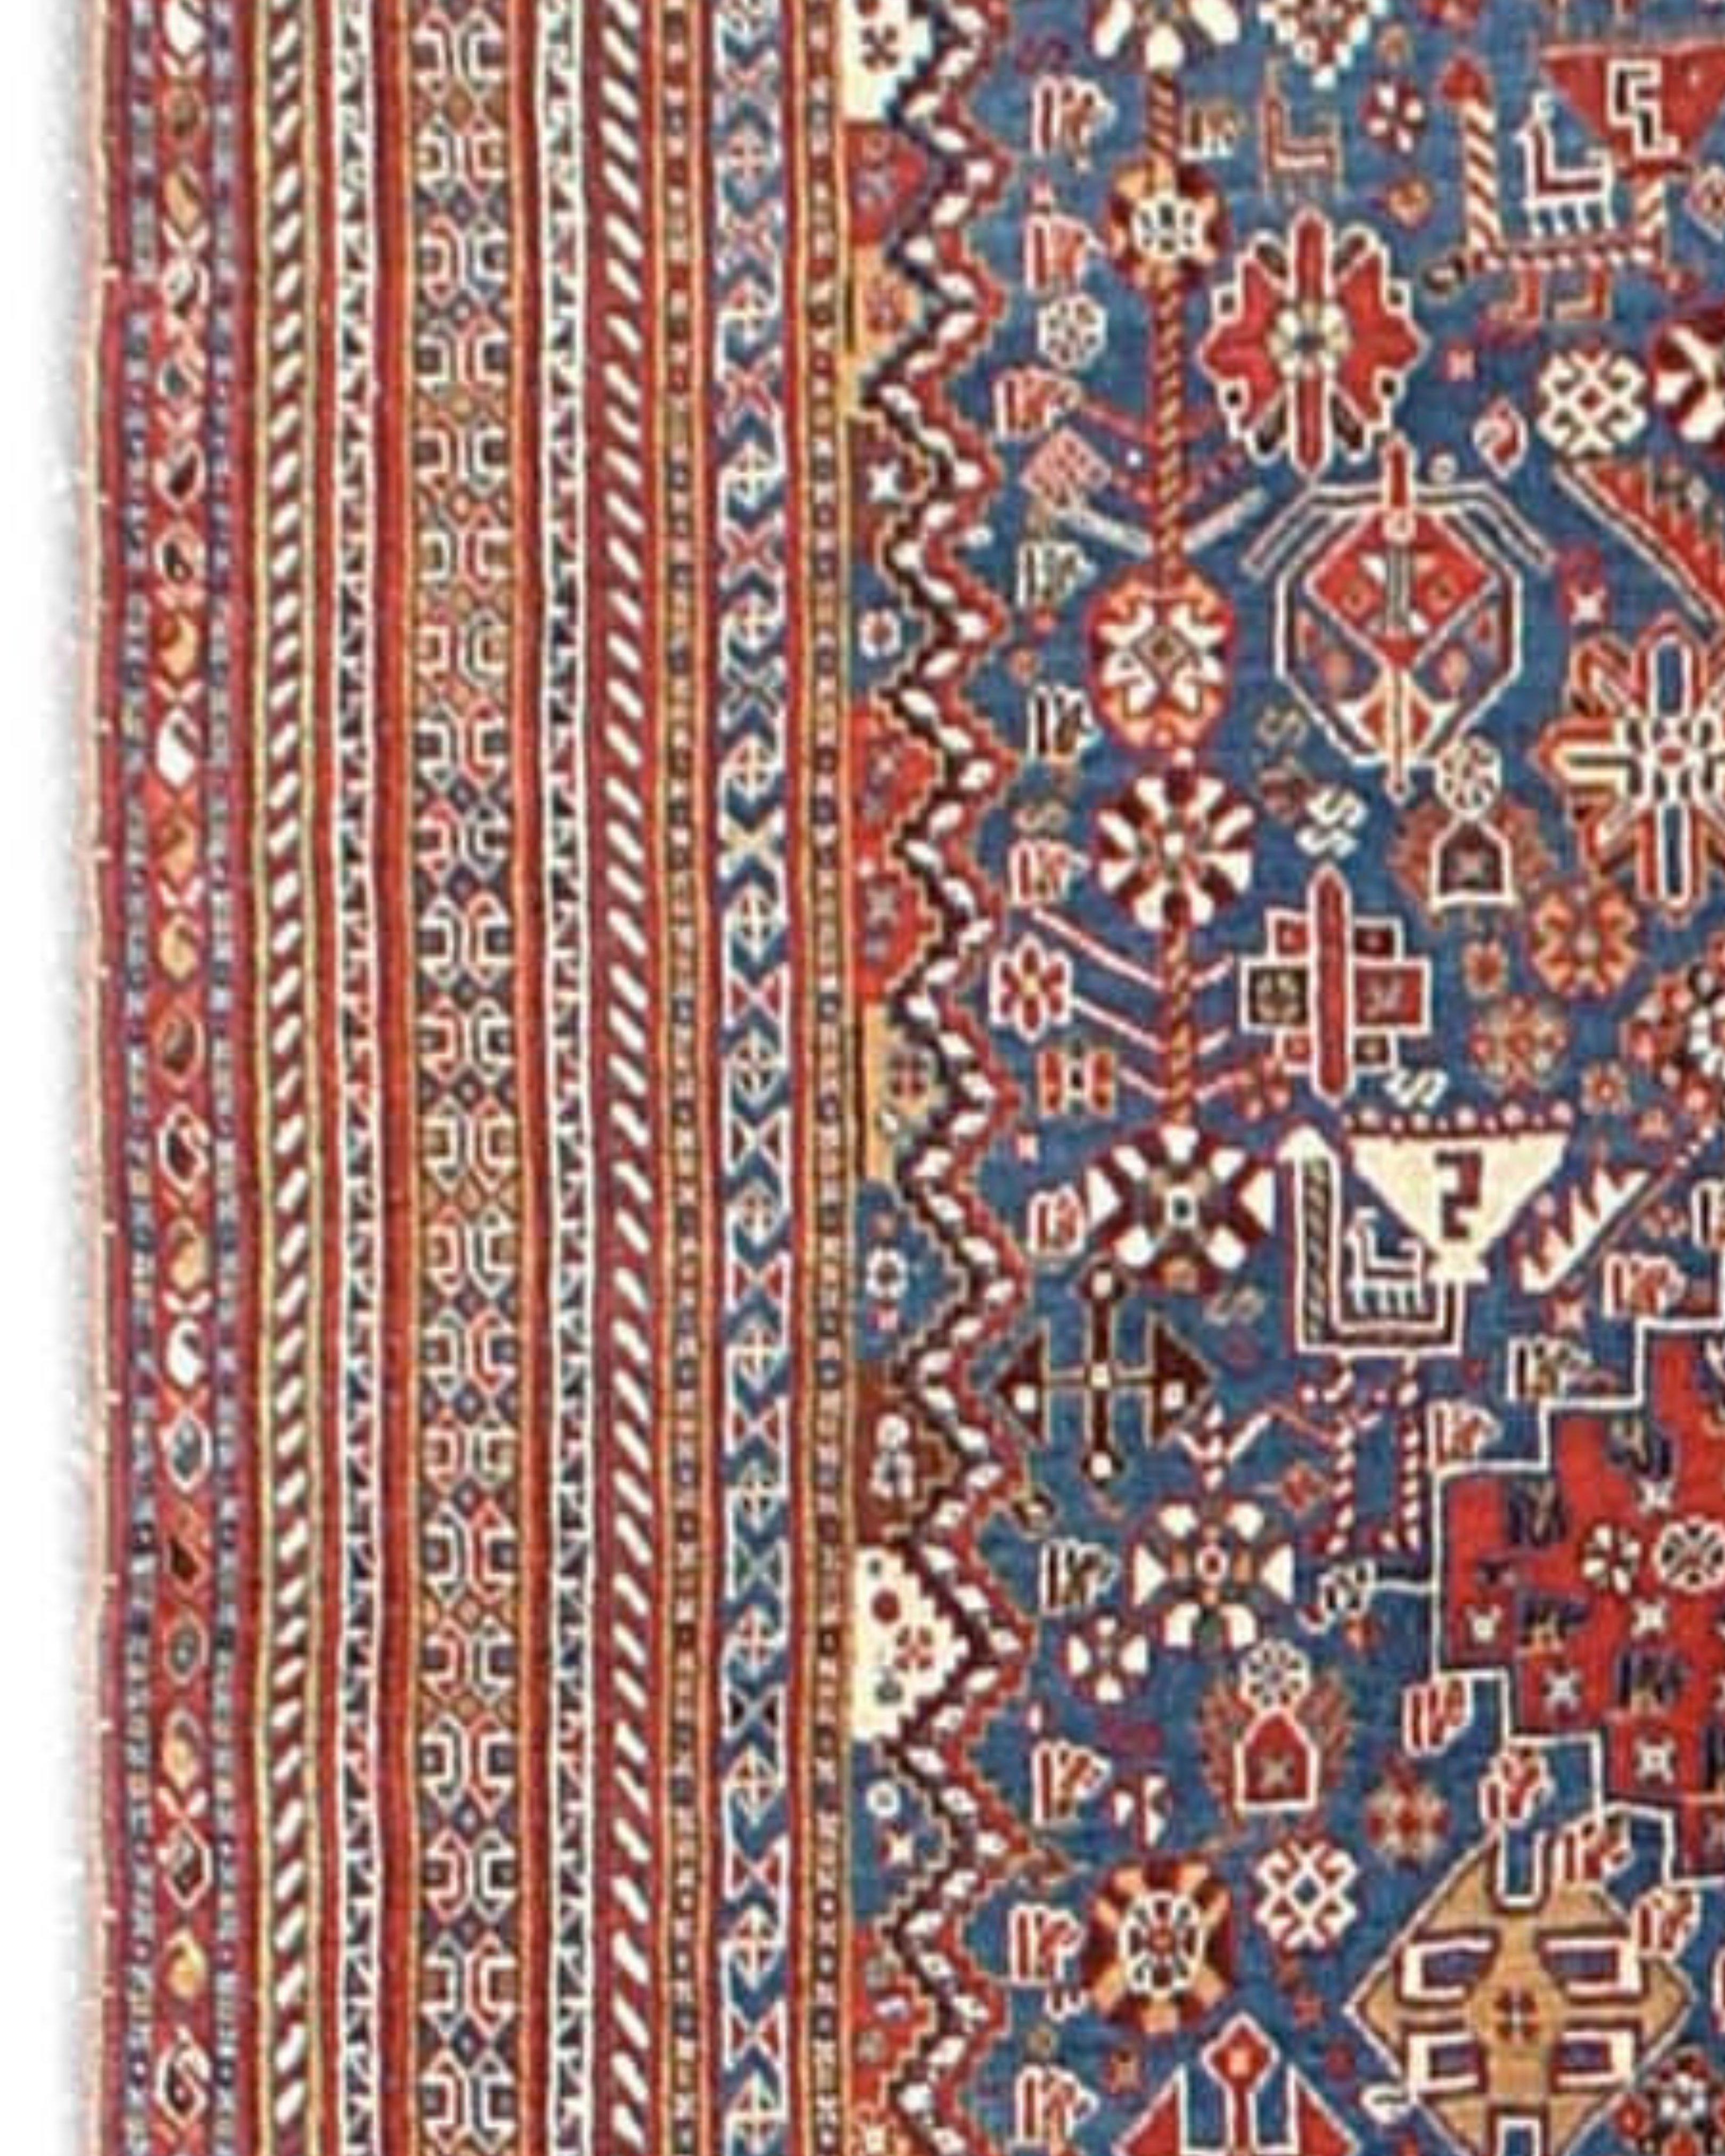 Antique Persian Qashqai Rug, 19th Century In Excellent Condition For Sale In San Francisco, CA